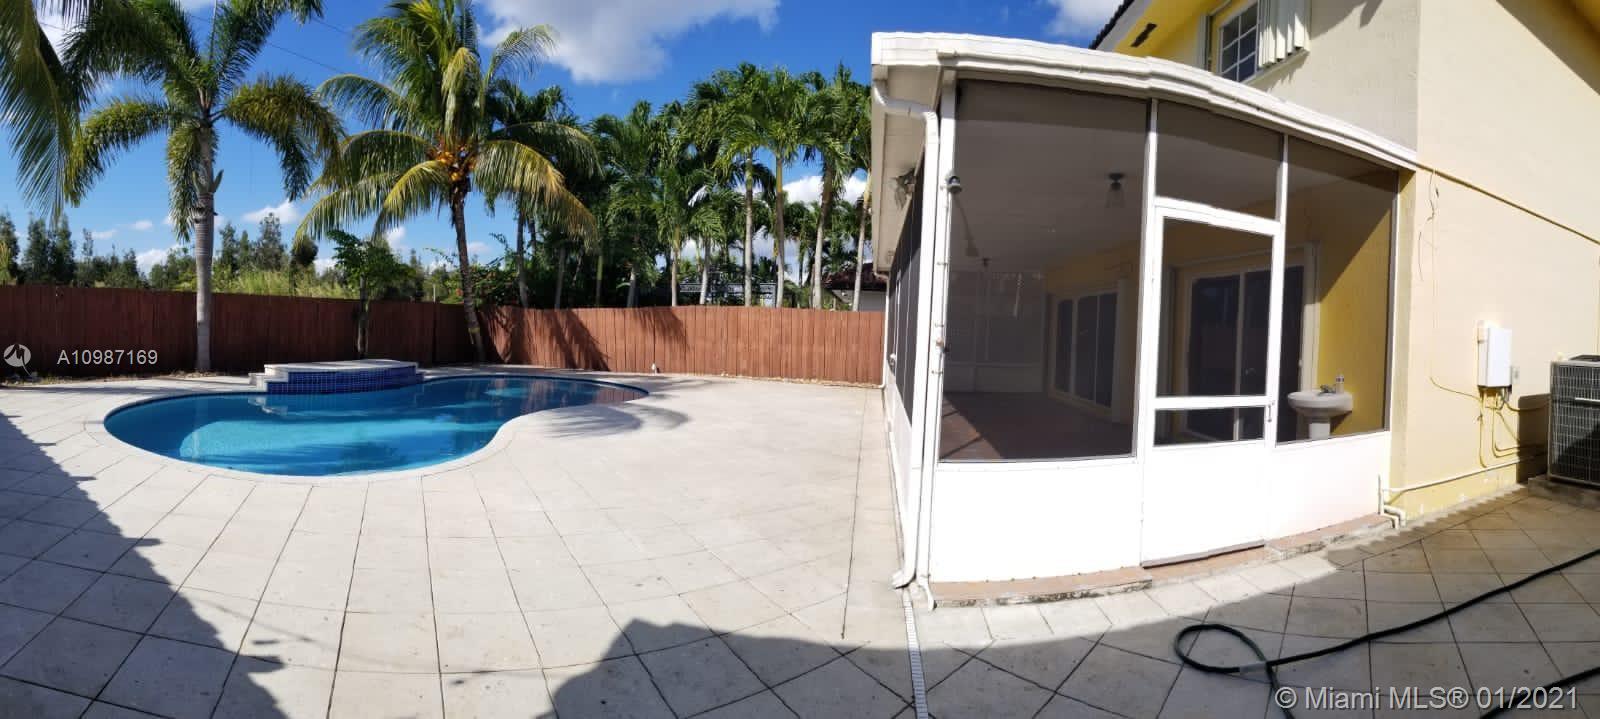 Photo 10 of   in Miami - MLS A10987169